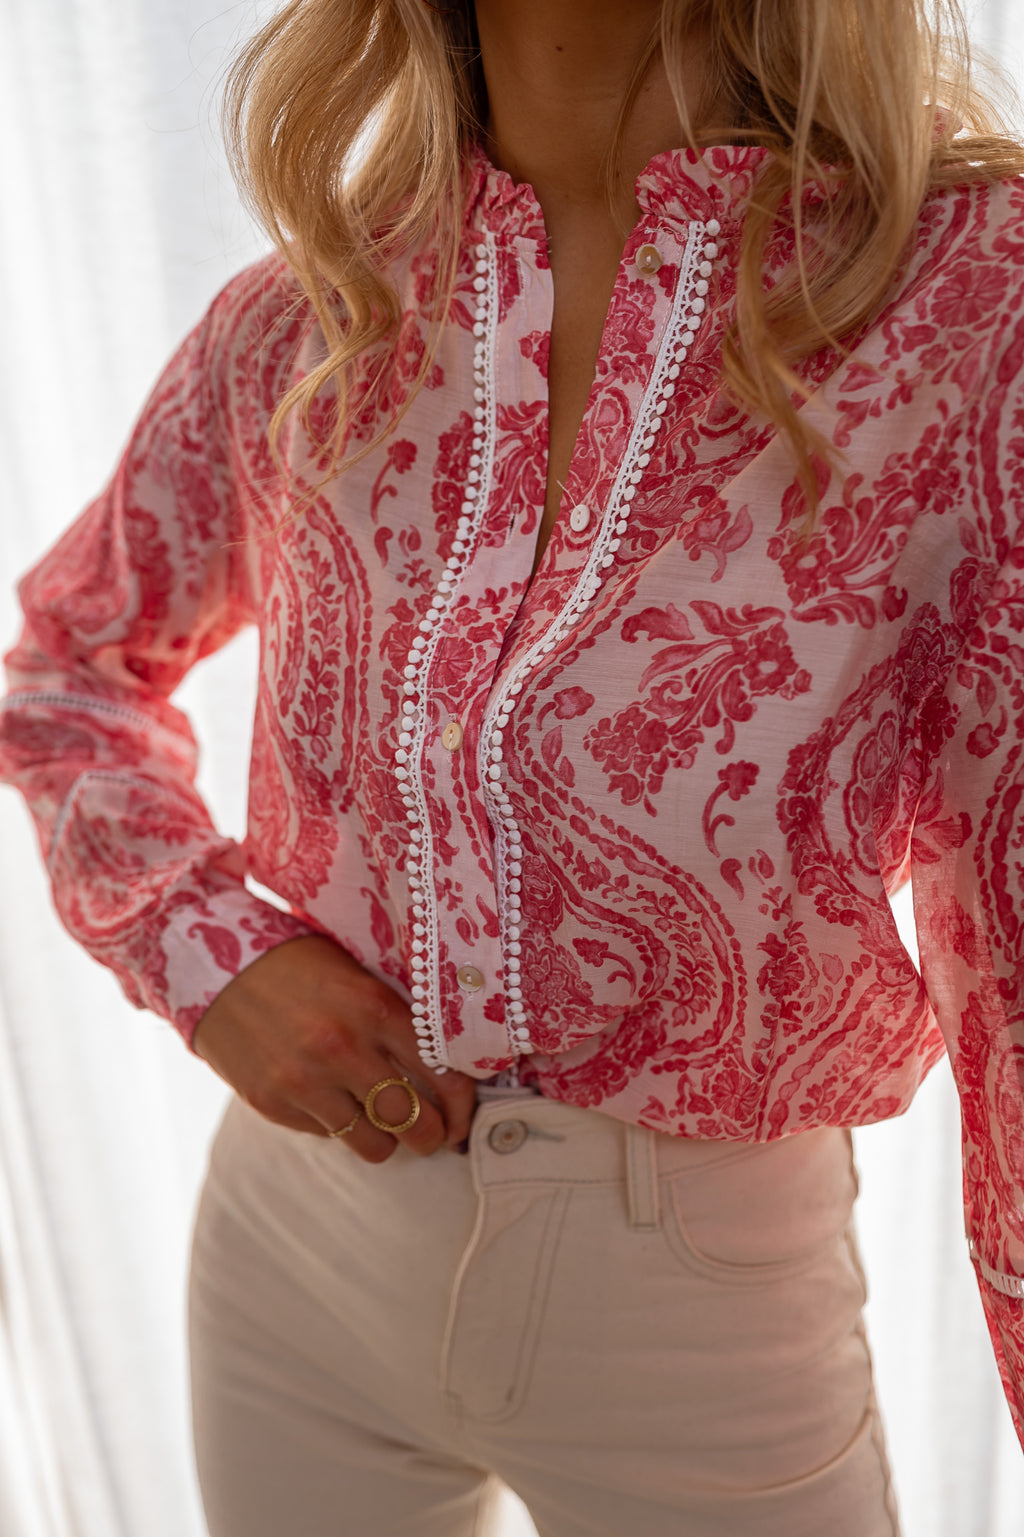 Othan shirt - red and pink